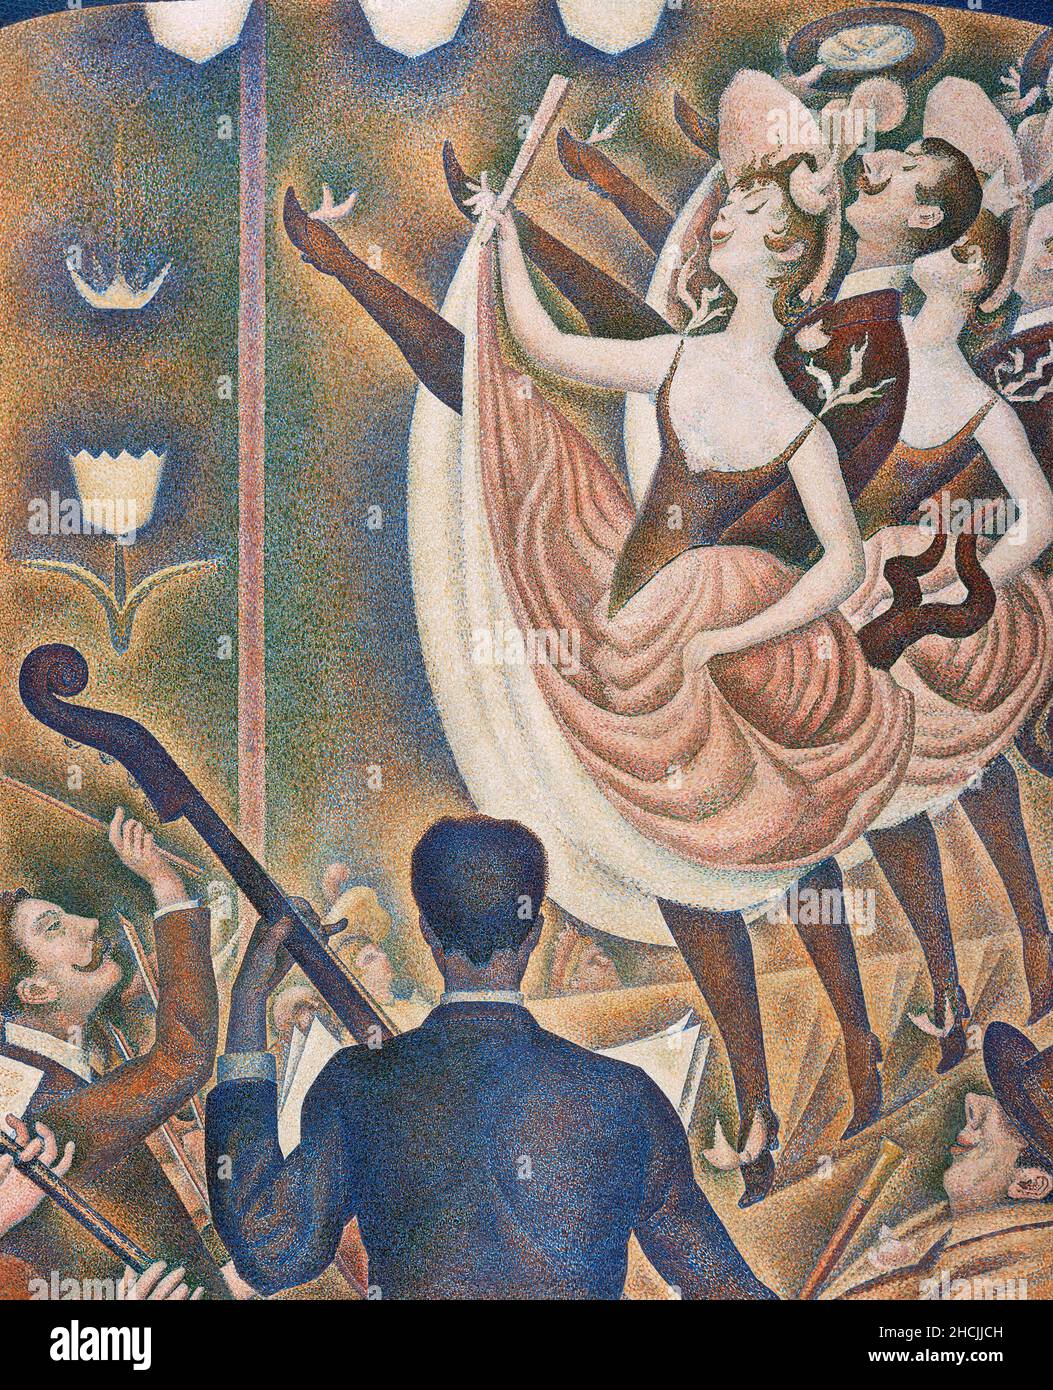 Le Chahut by Georges Seurat Stock Photo